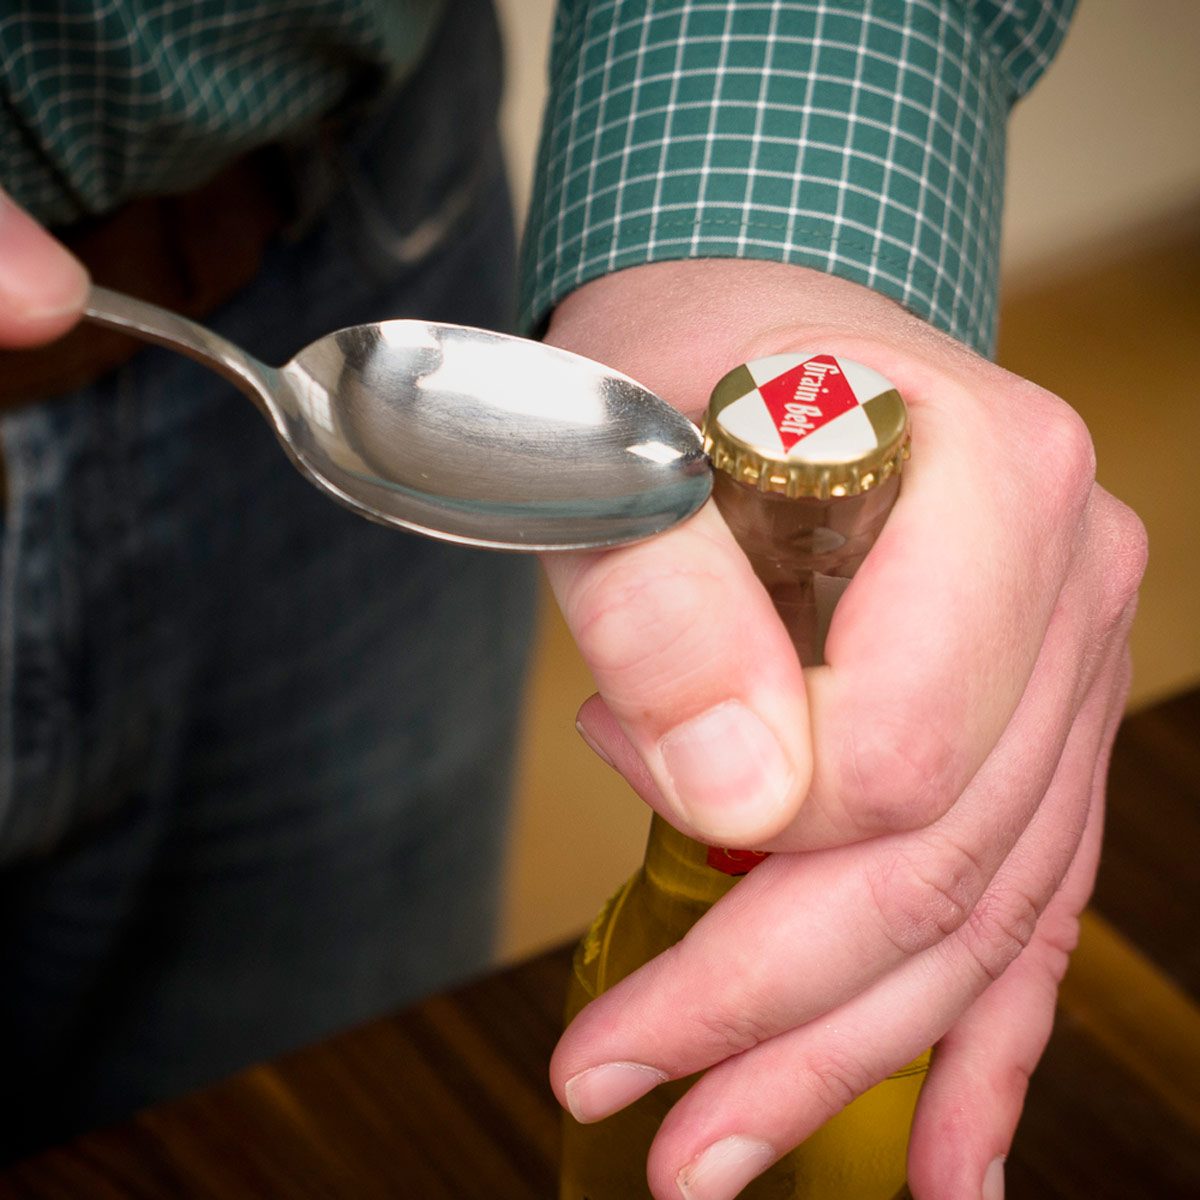 4 Ways to Open a Can Without a Can Opener: Spoon, Knife, More